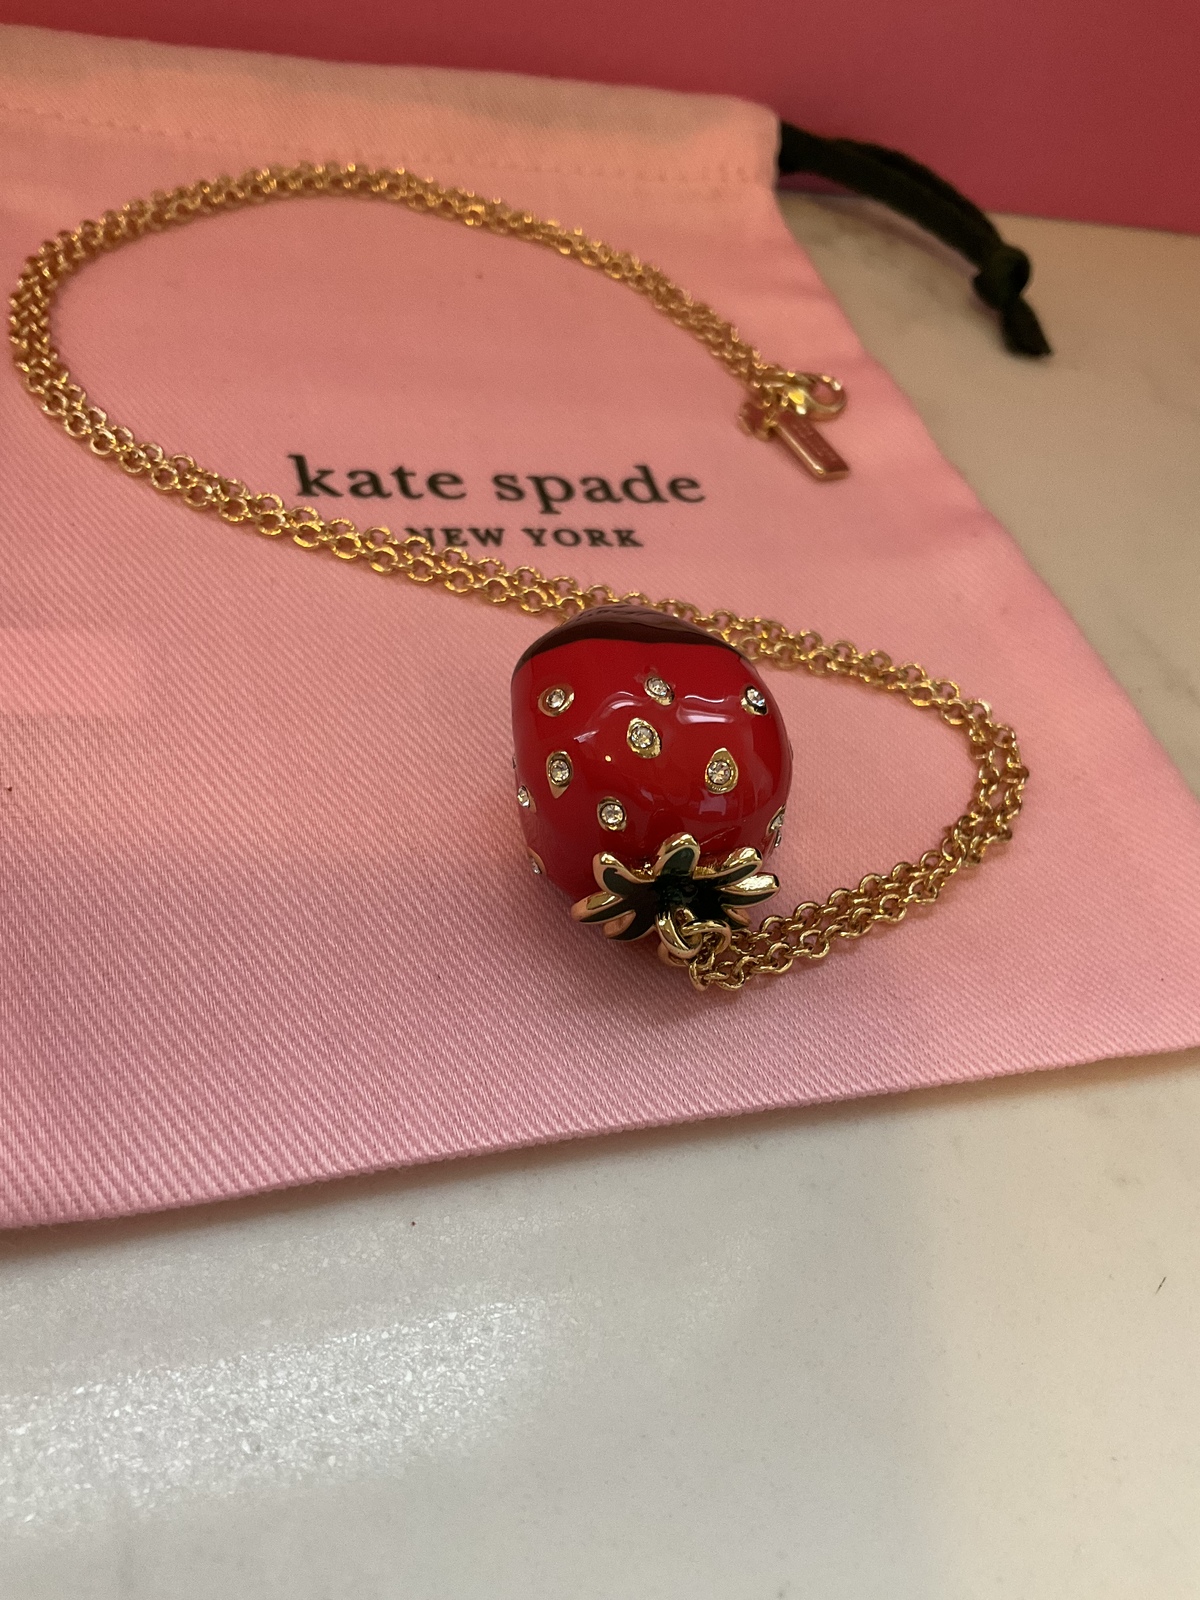 Kate spade New York Outside the Box chocolate Covered Strawberry Necklace  penda - $69.99